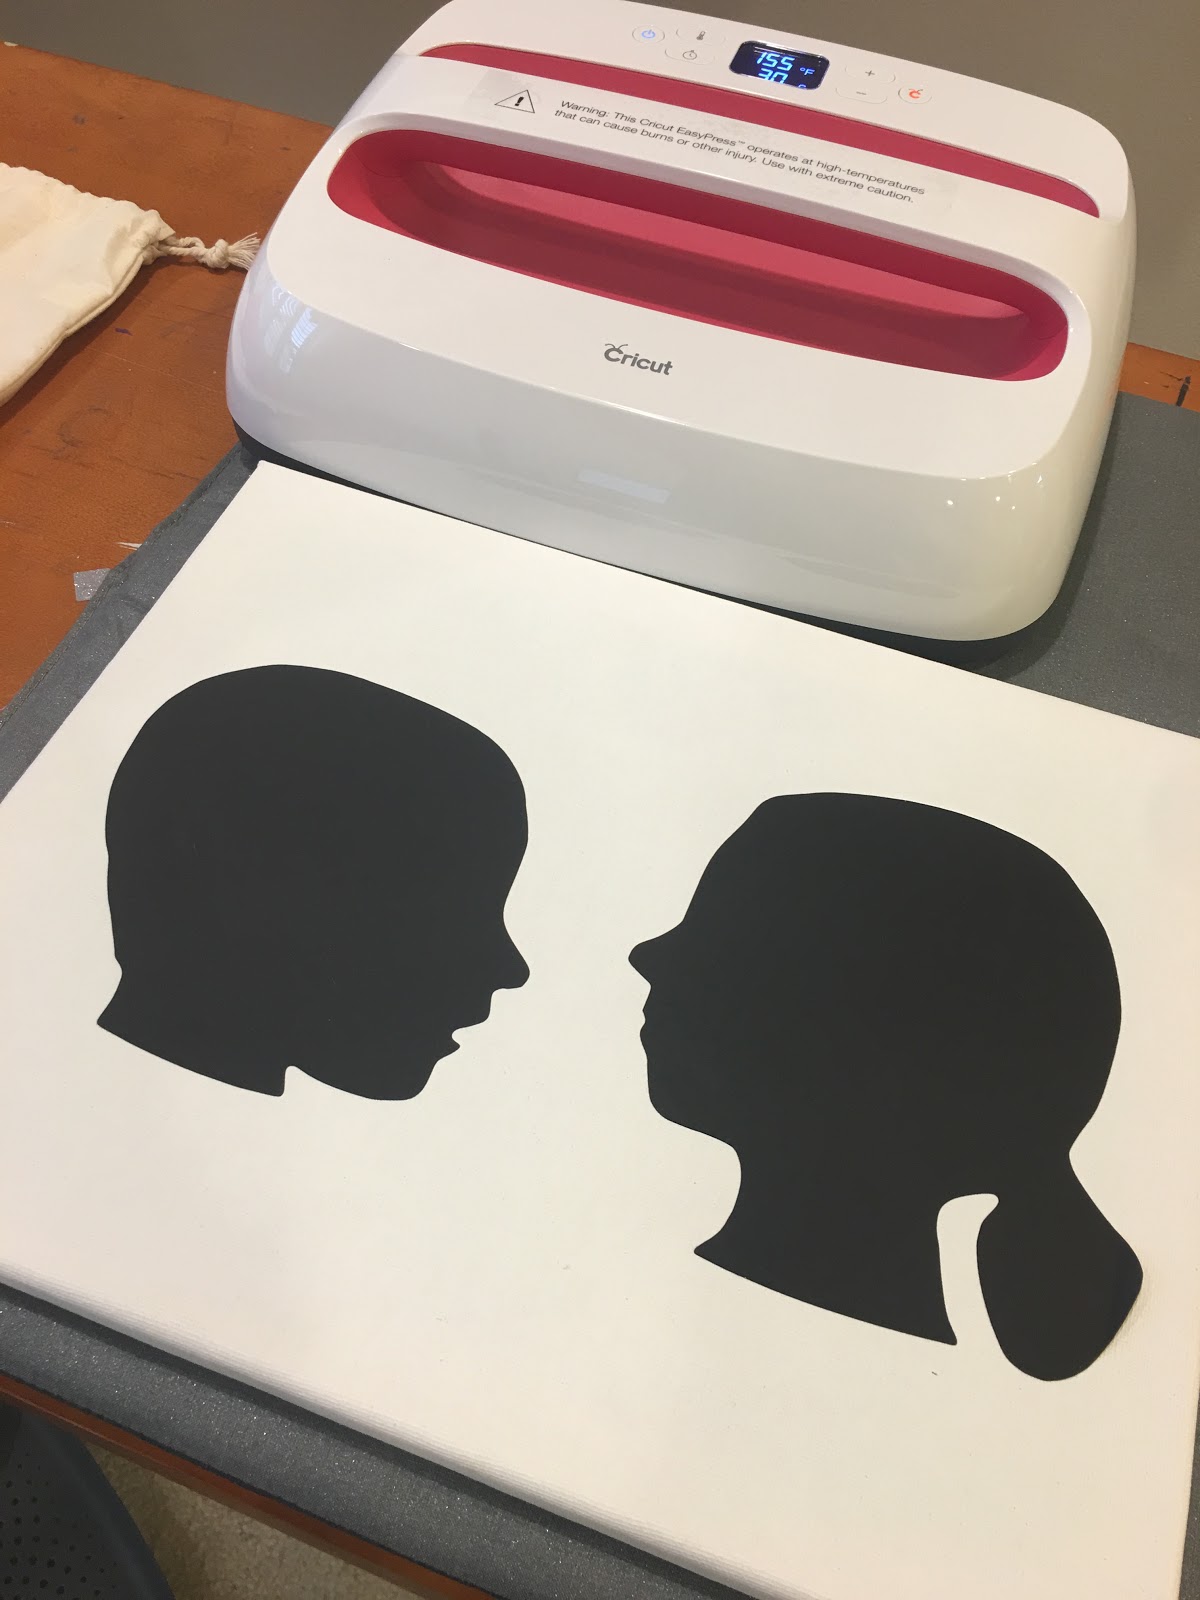 Cricut EasyPress 2 Review: All Your Burning Questions Answered - Silhouette  School